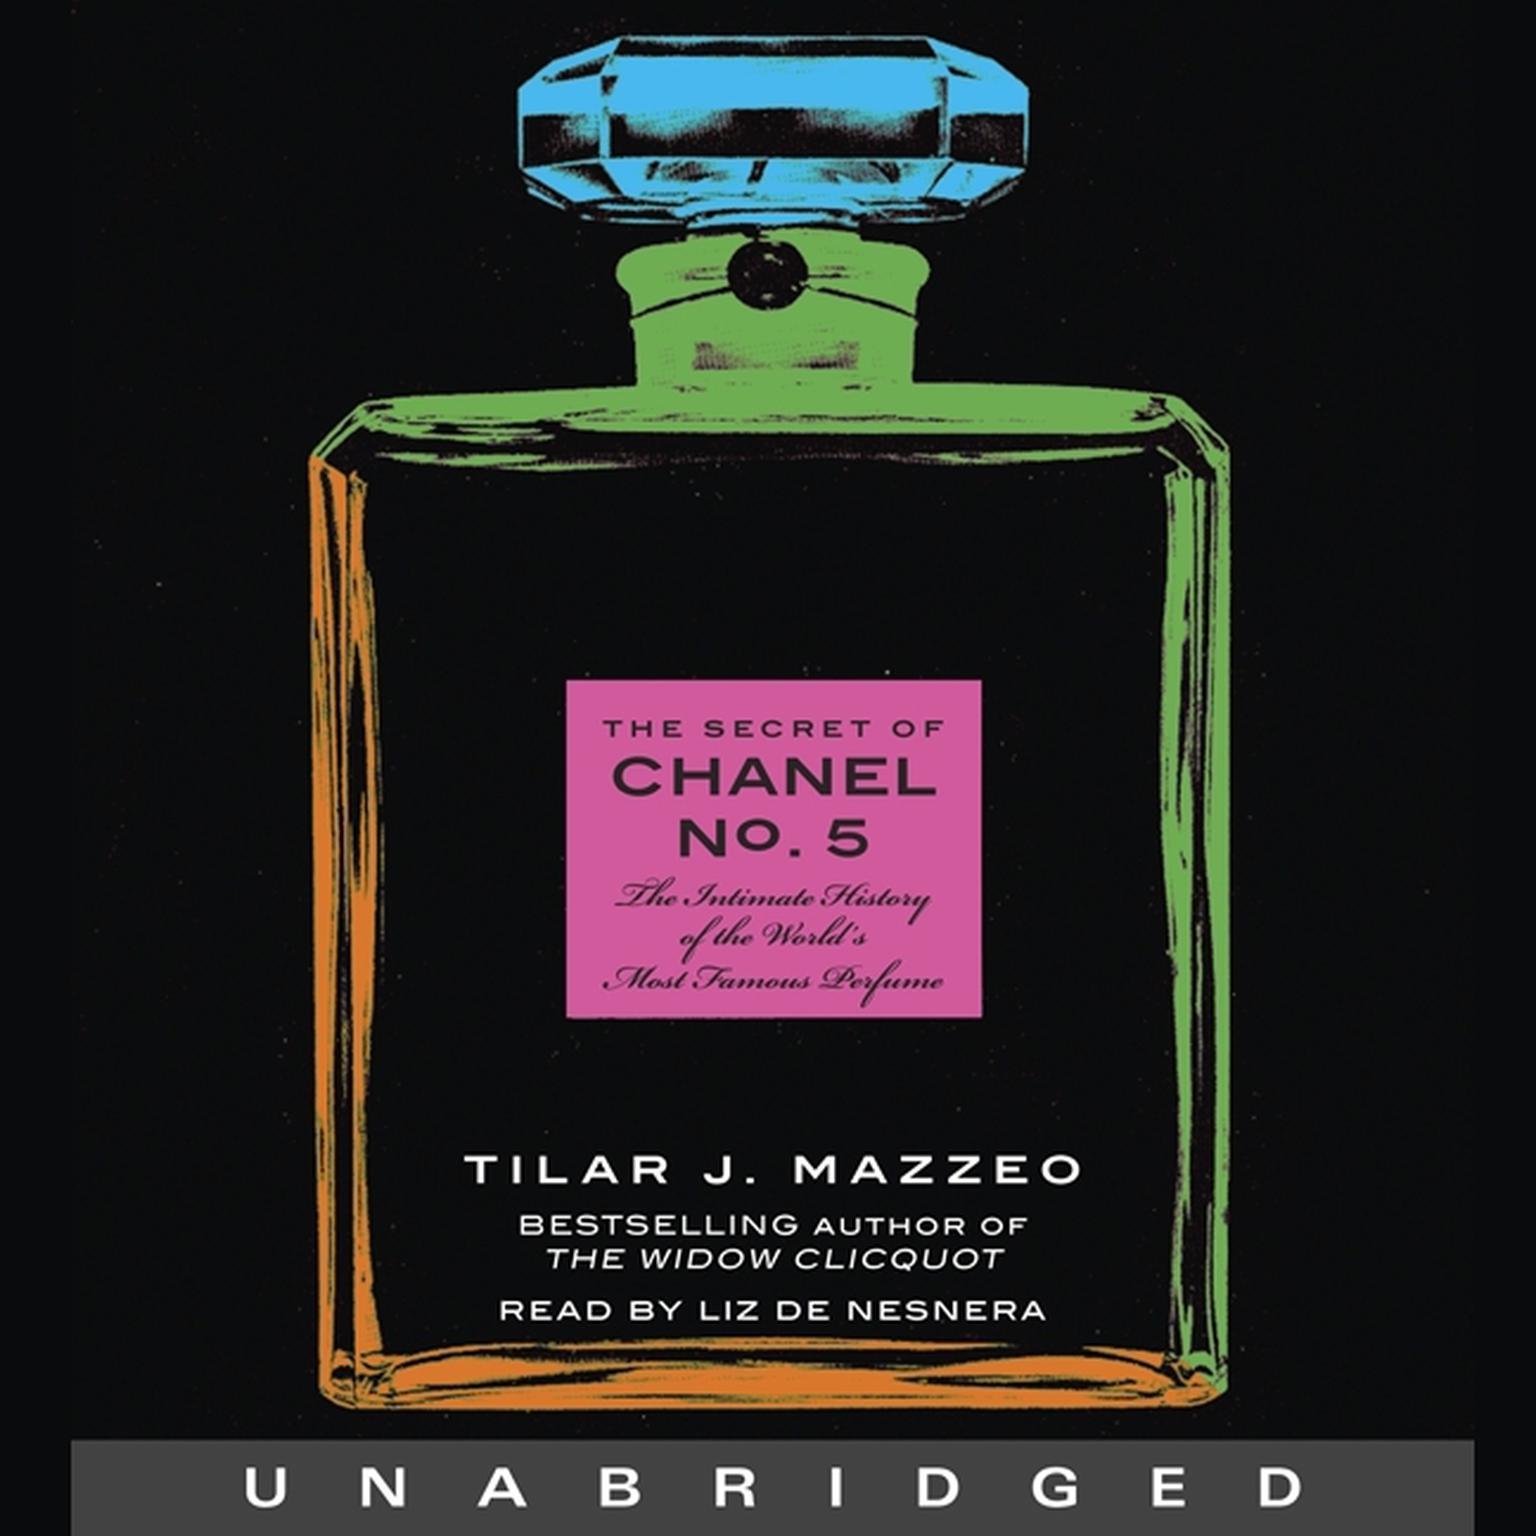 The Secret of Chanel No. 5: The Intimate History of the Worlds Most Famous Perfume Audiobook, by Tilar J. Mazzeo